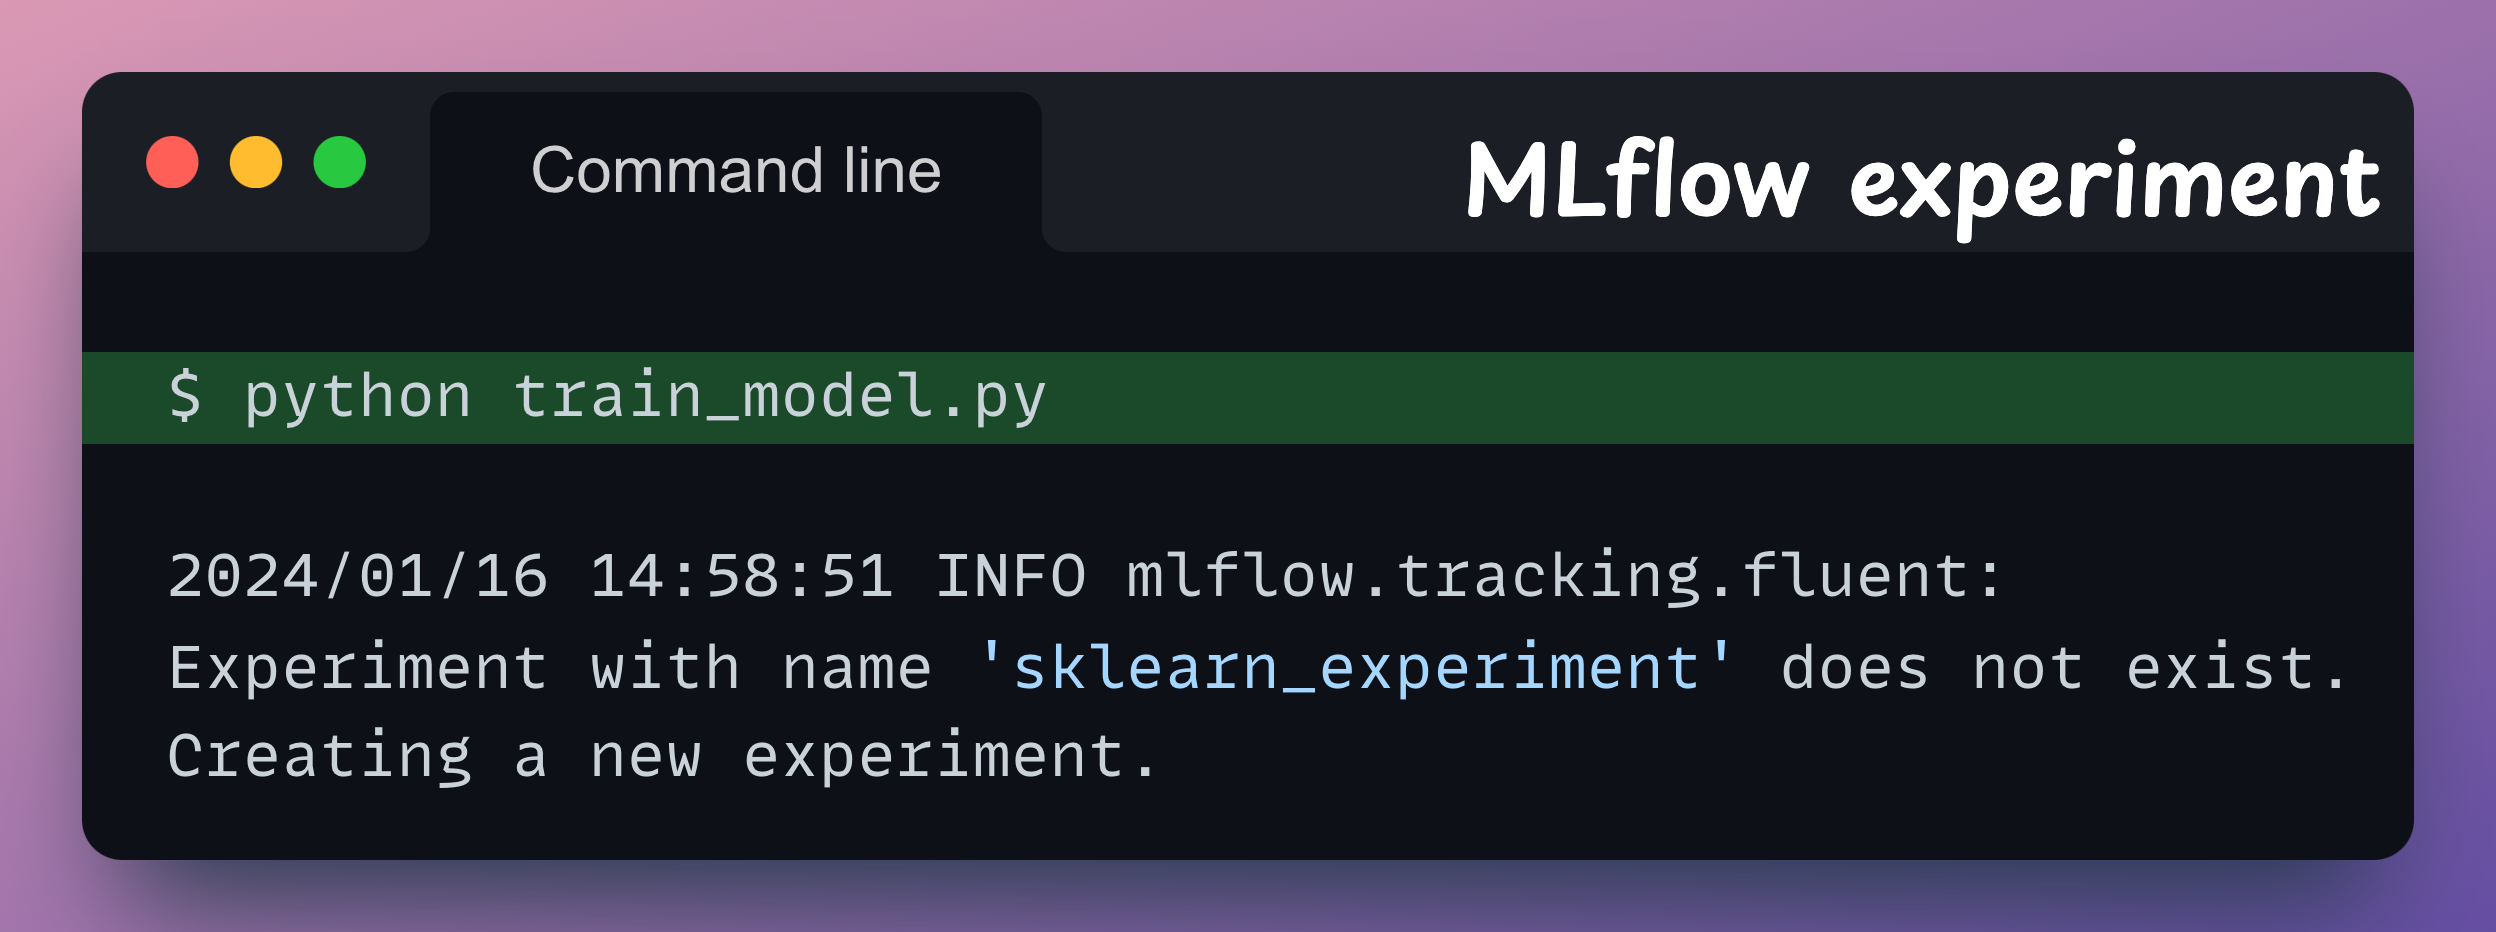 How To (Immensely) Optimize Your Machine Learning Development and Operations with MLflow